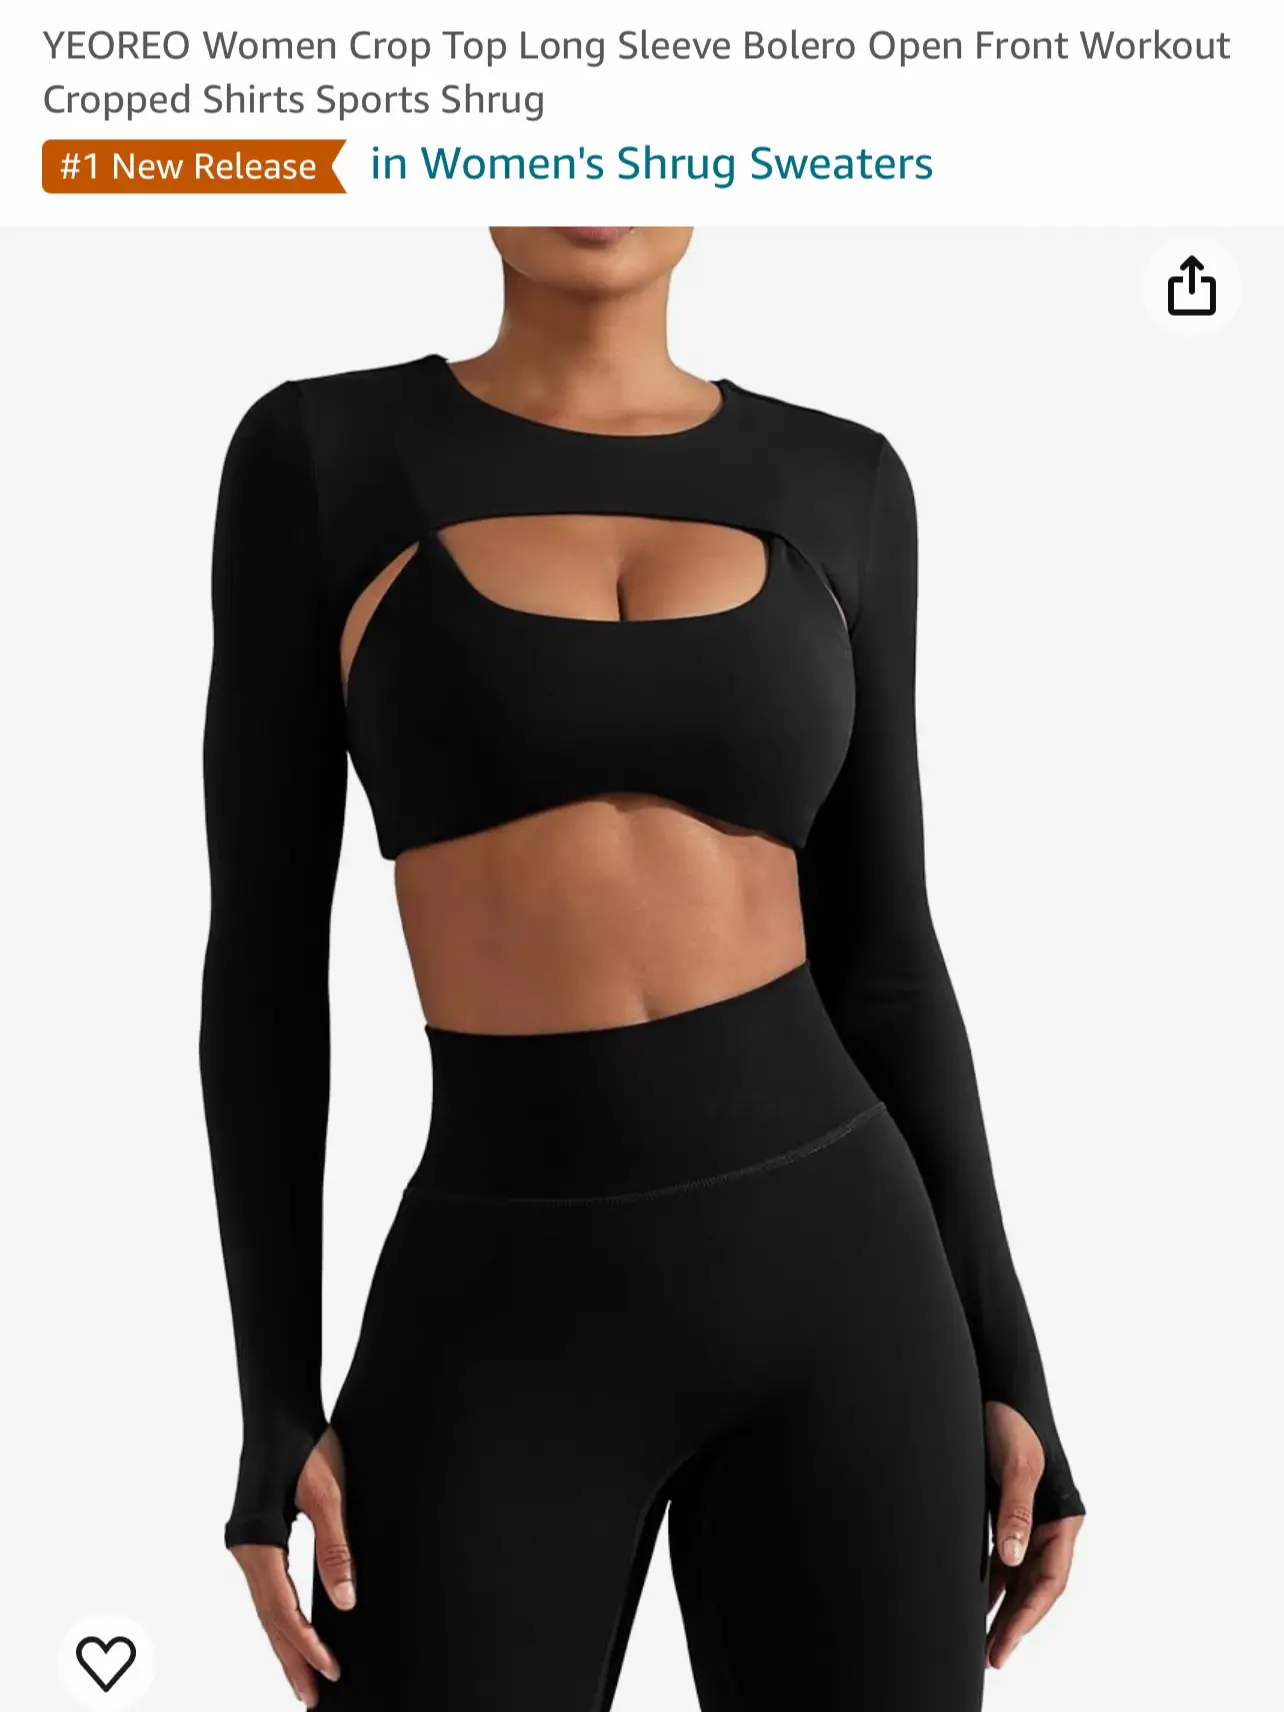 Women's fitness clothing on a budget - Lemon8 Search